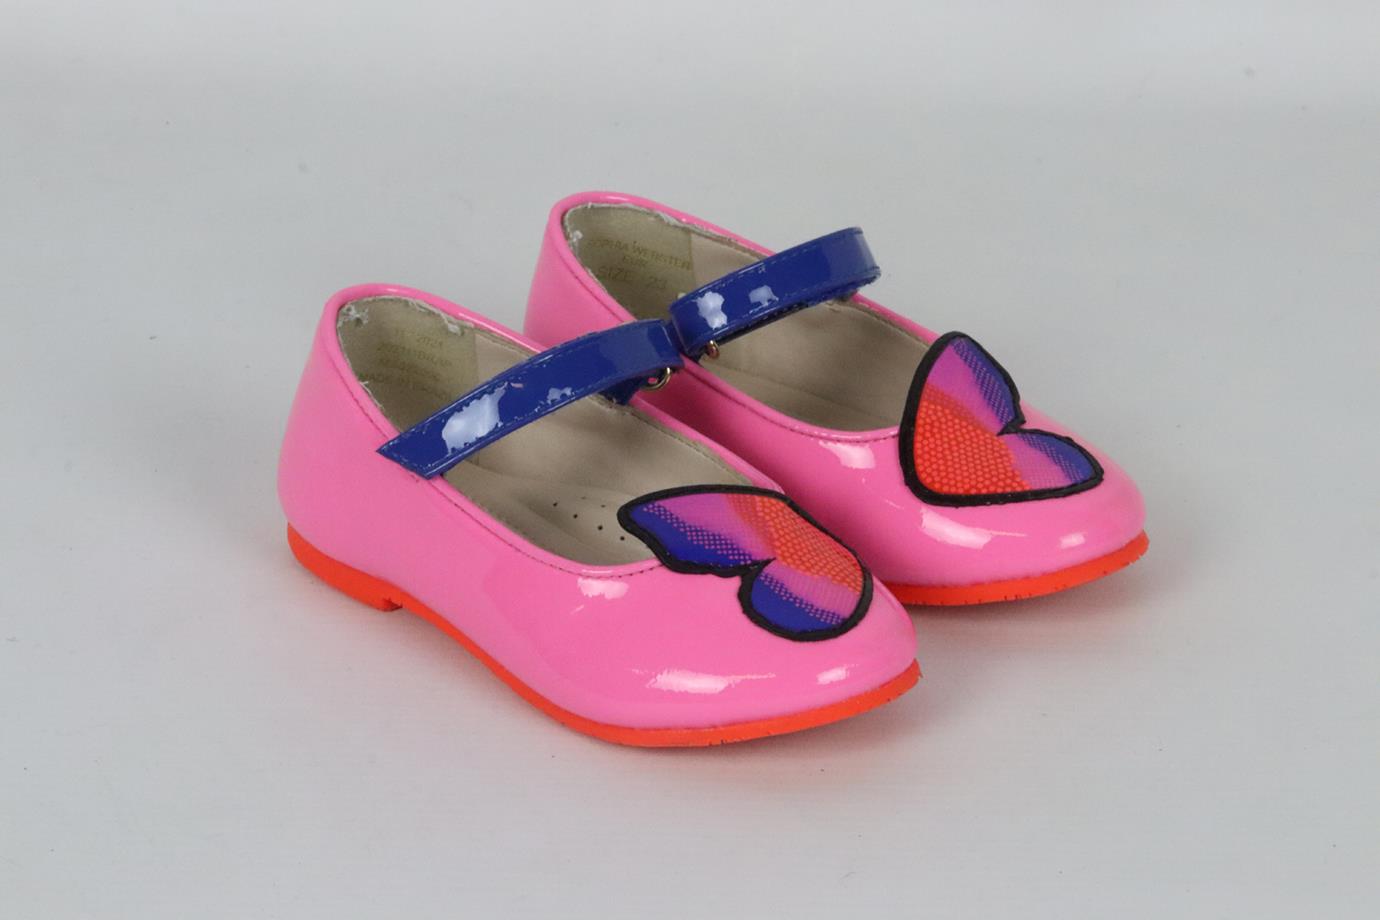 SOPHIA WEBSTER BABY GIRLS BUTTERFLY PATENT LEATHER SHOES EU 23 UK 6